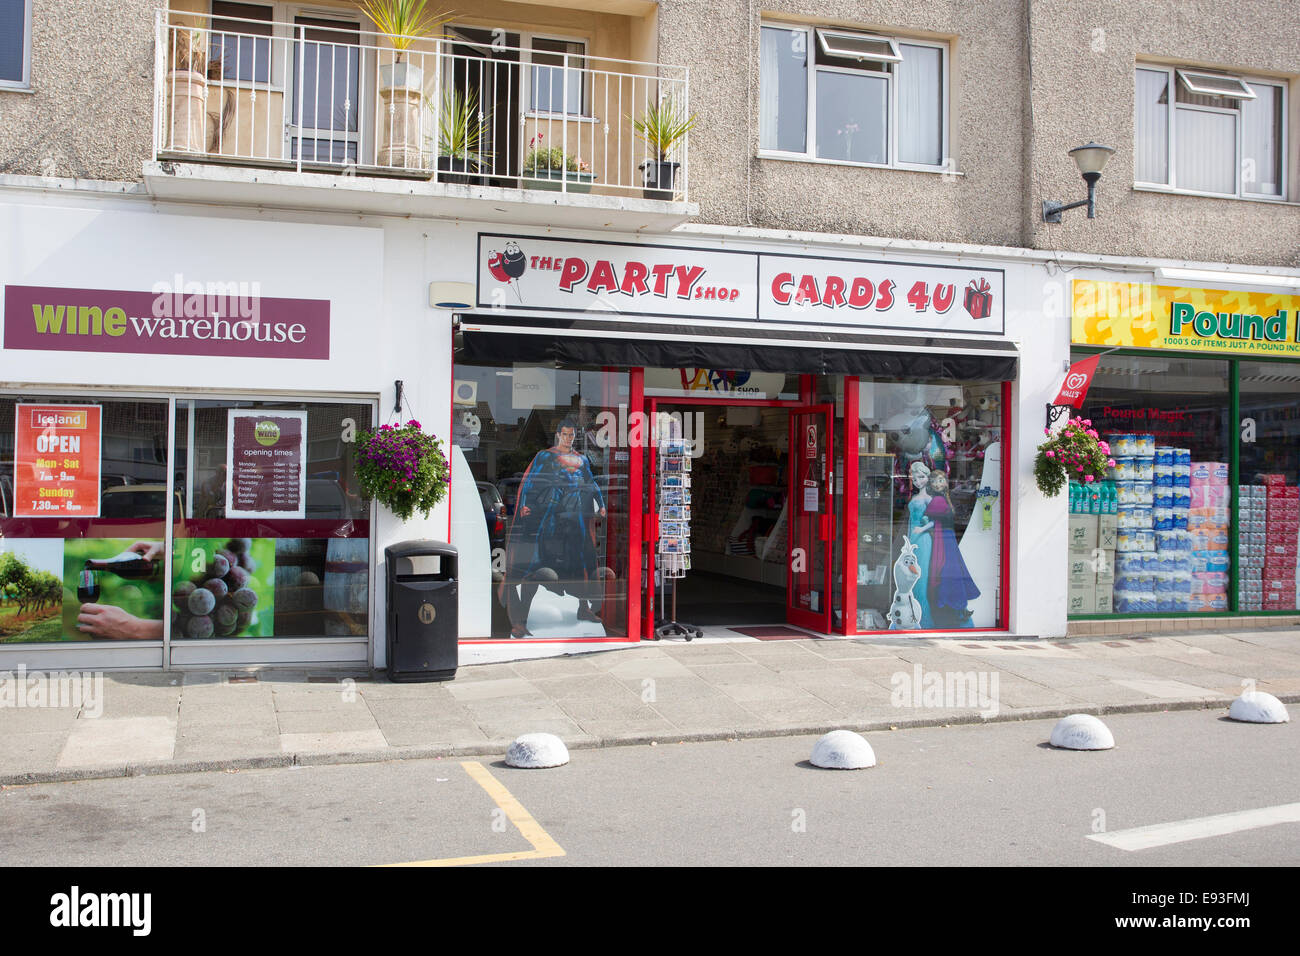 Wine Warehouse The Party Shop Cards 4U Parade shops stores shopping  small shops St. Brelade Stock Photo